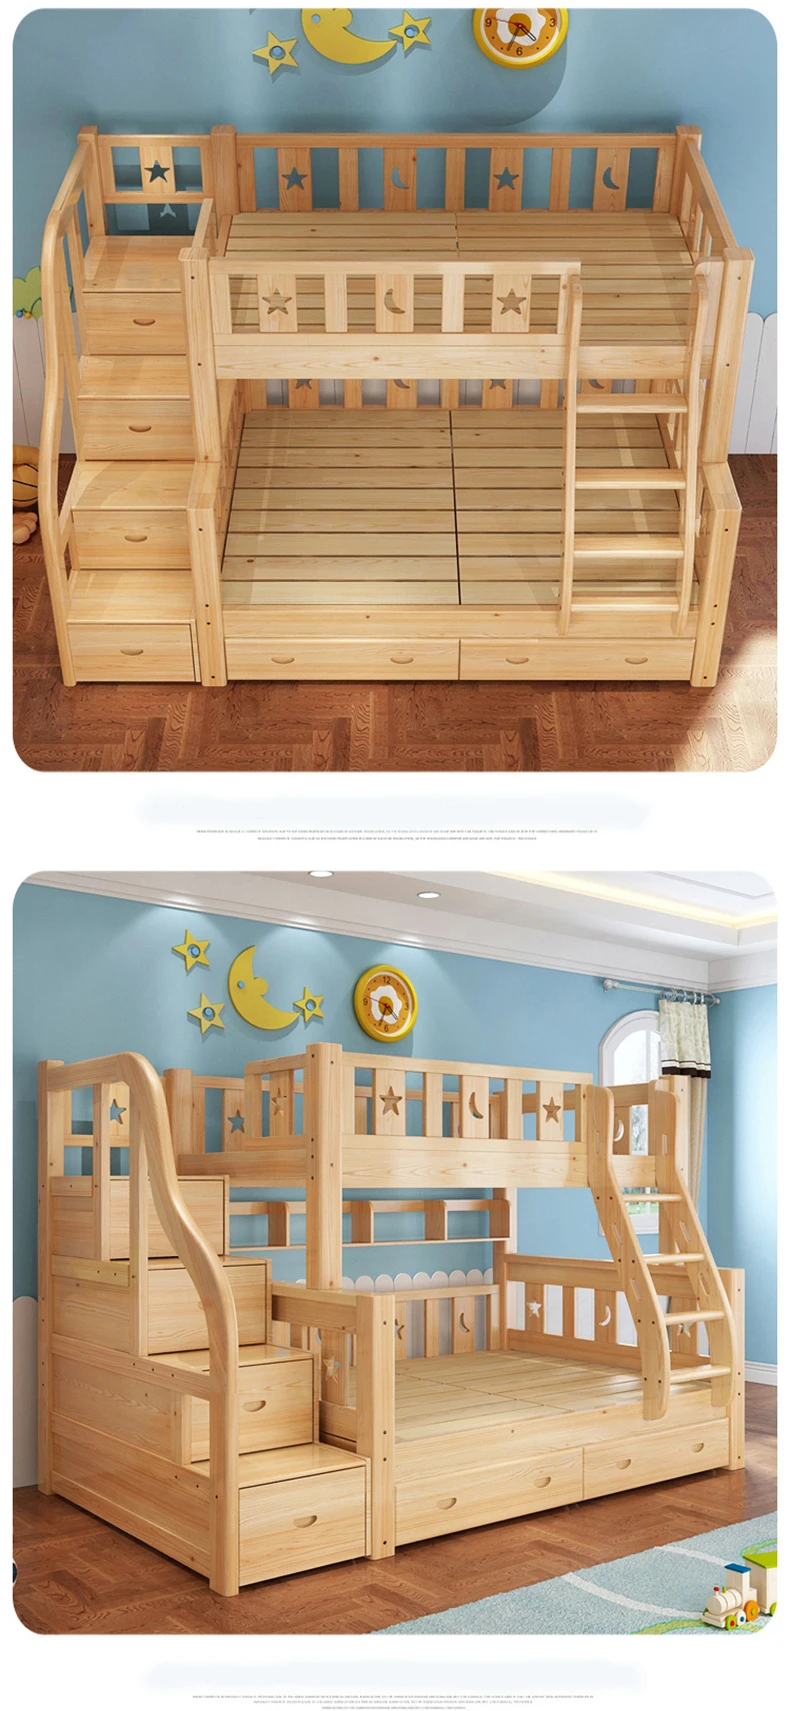 Home Furniture Cheap Used Pine Wood Kids Bunk Beds For Sale